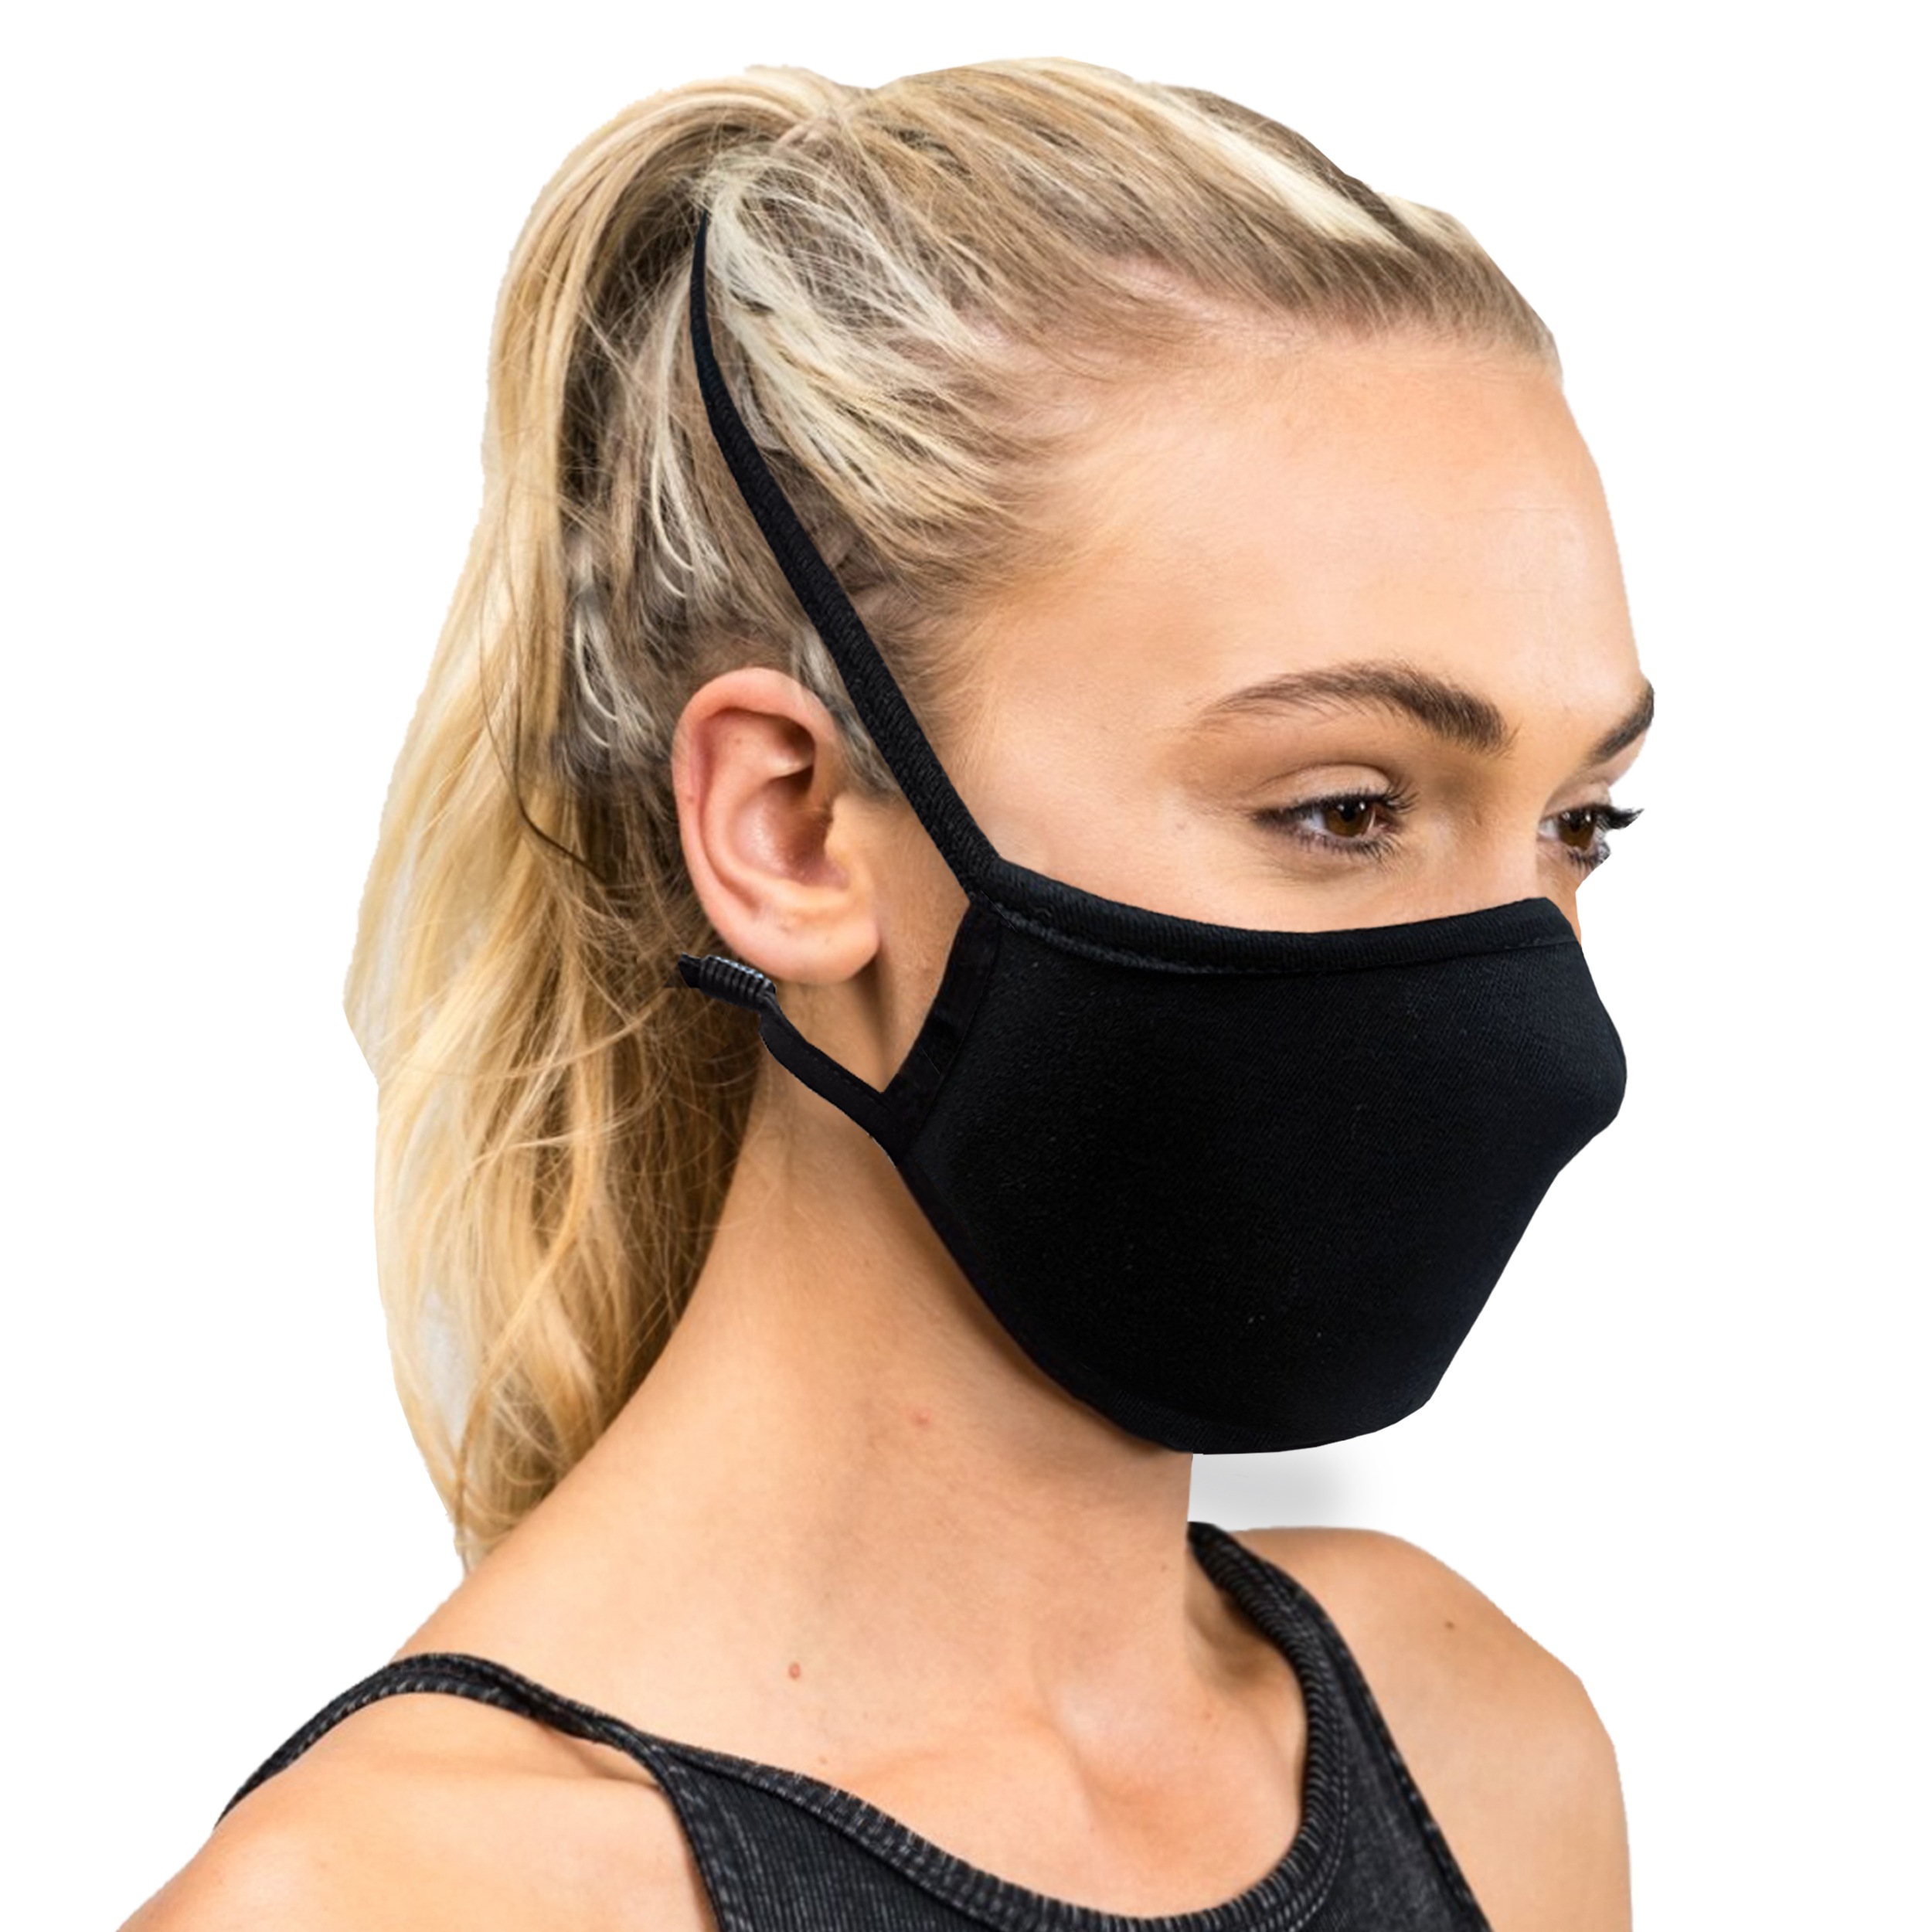 4-pc Mask Straps Holders for Back of Head or Neck with Adjustable Stopper for Unisex Adult Kids Assorted